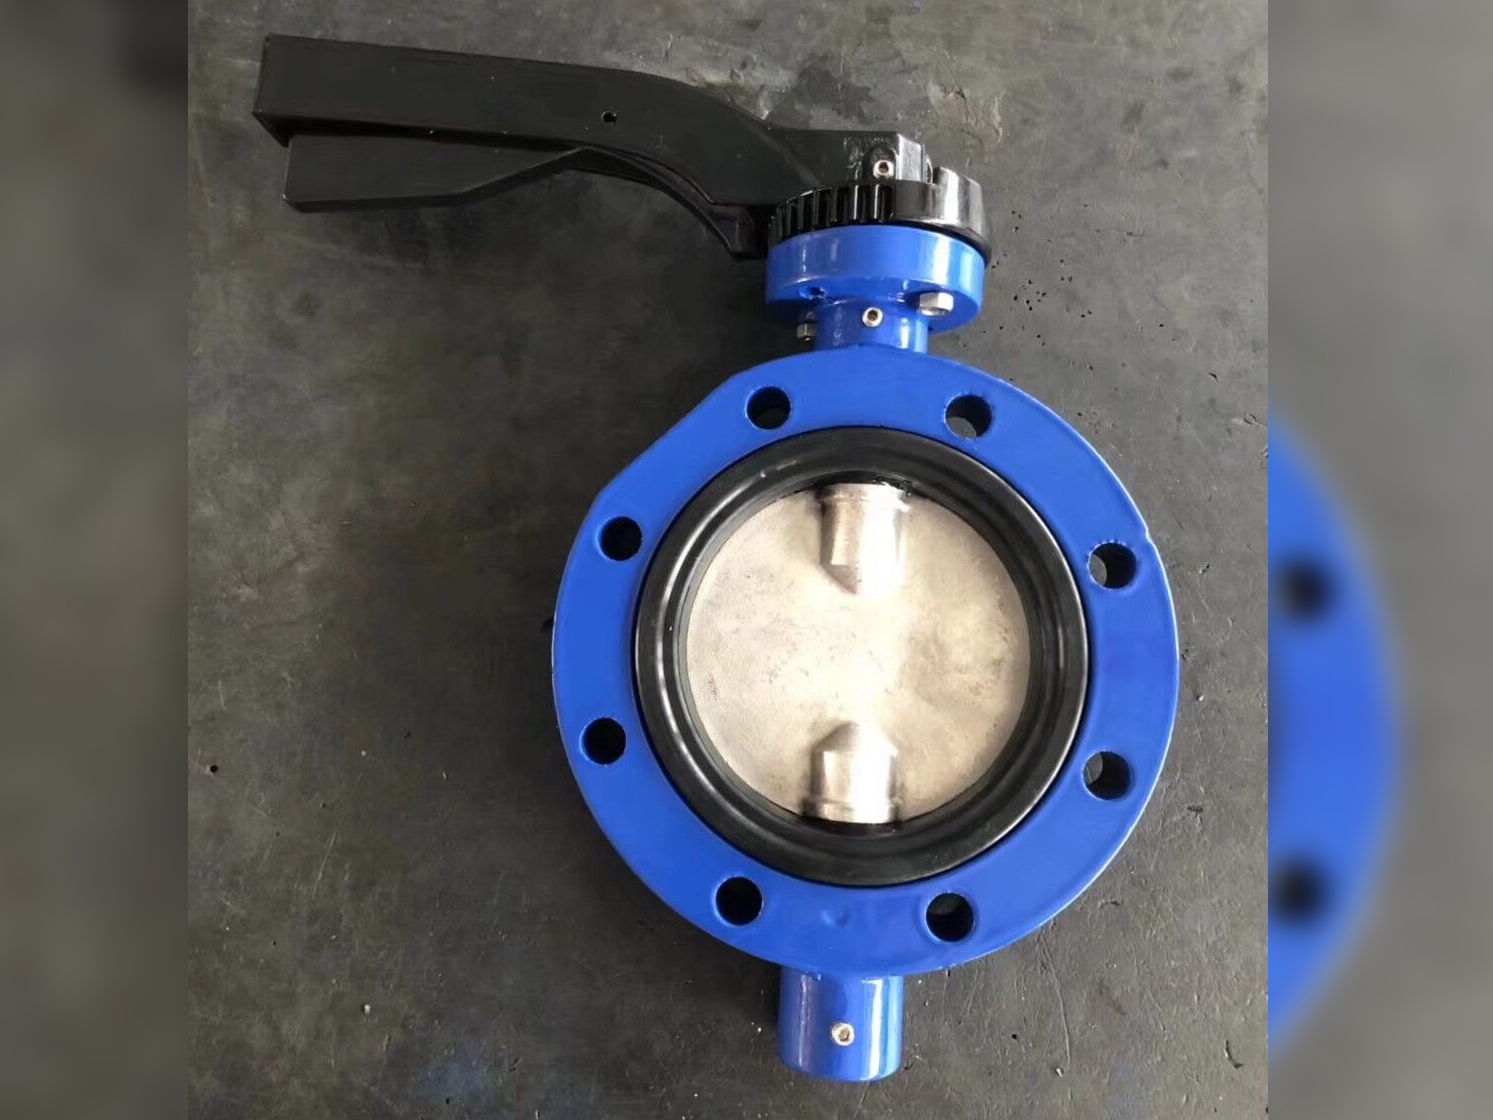 Application of Chinese Double Half Axis Non Pin Butterfly Valves: Industrial Innovation that Disrupts Traditional Concepts